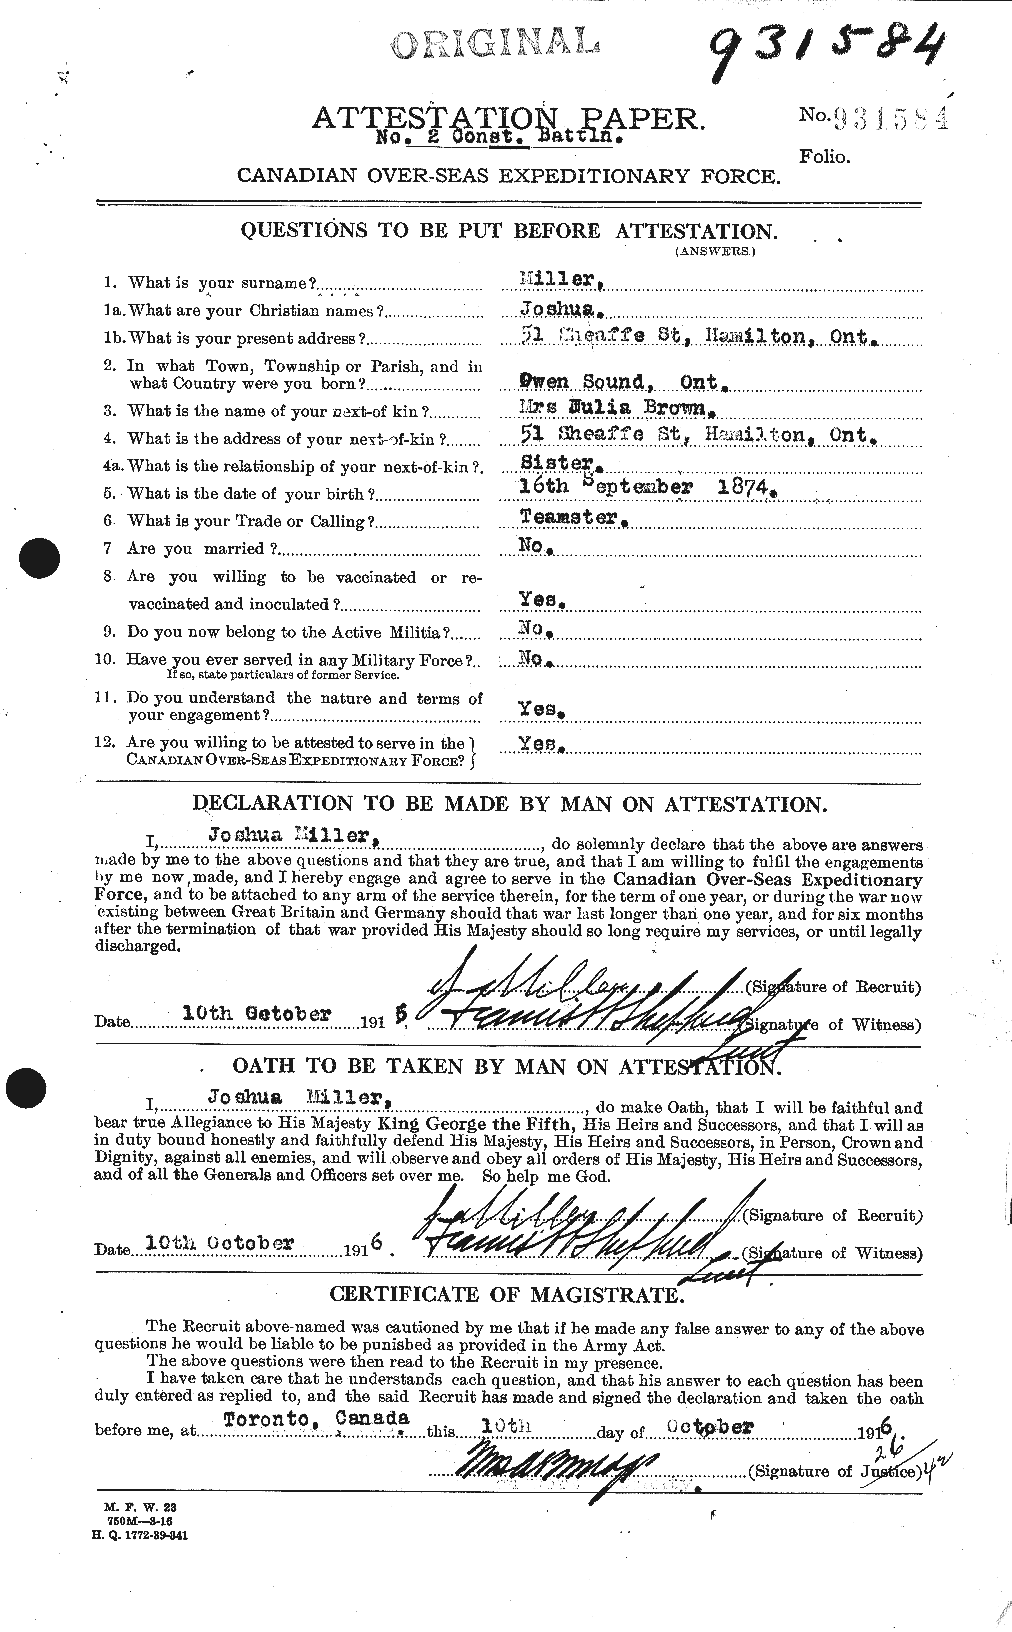 Personnel Records of the First World War - CEF 499475a